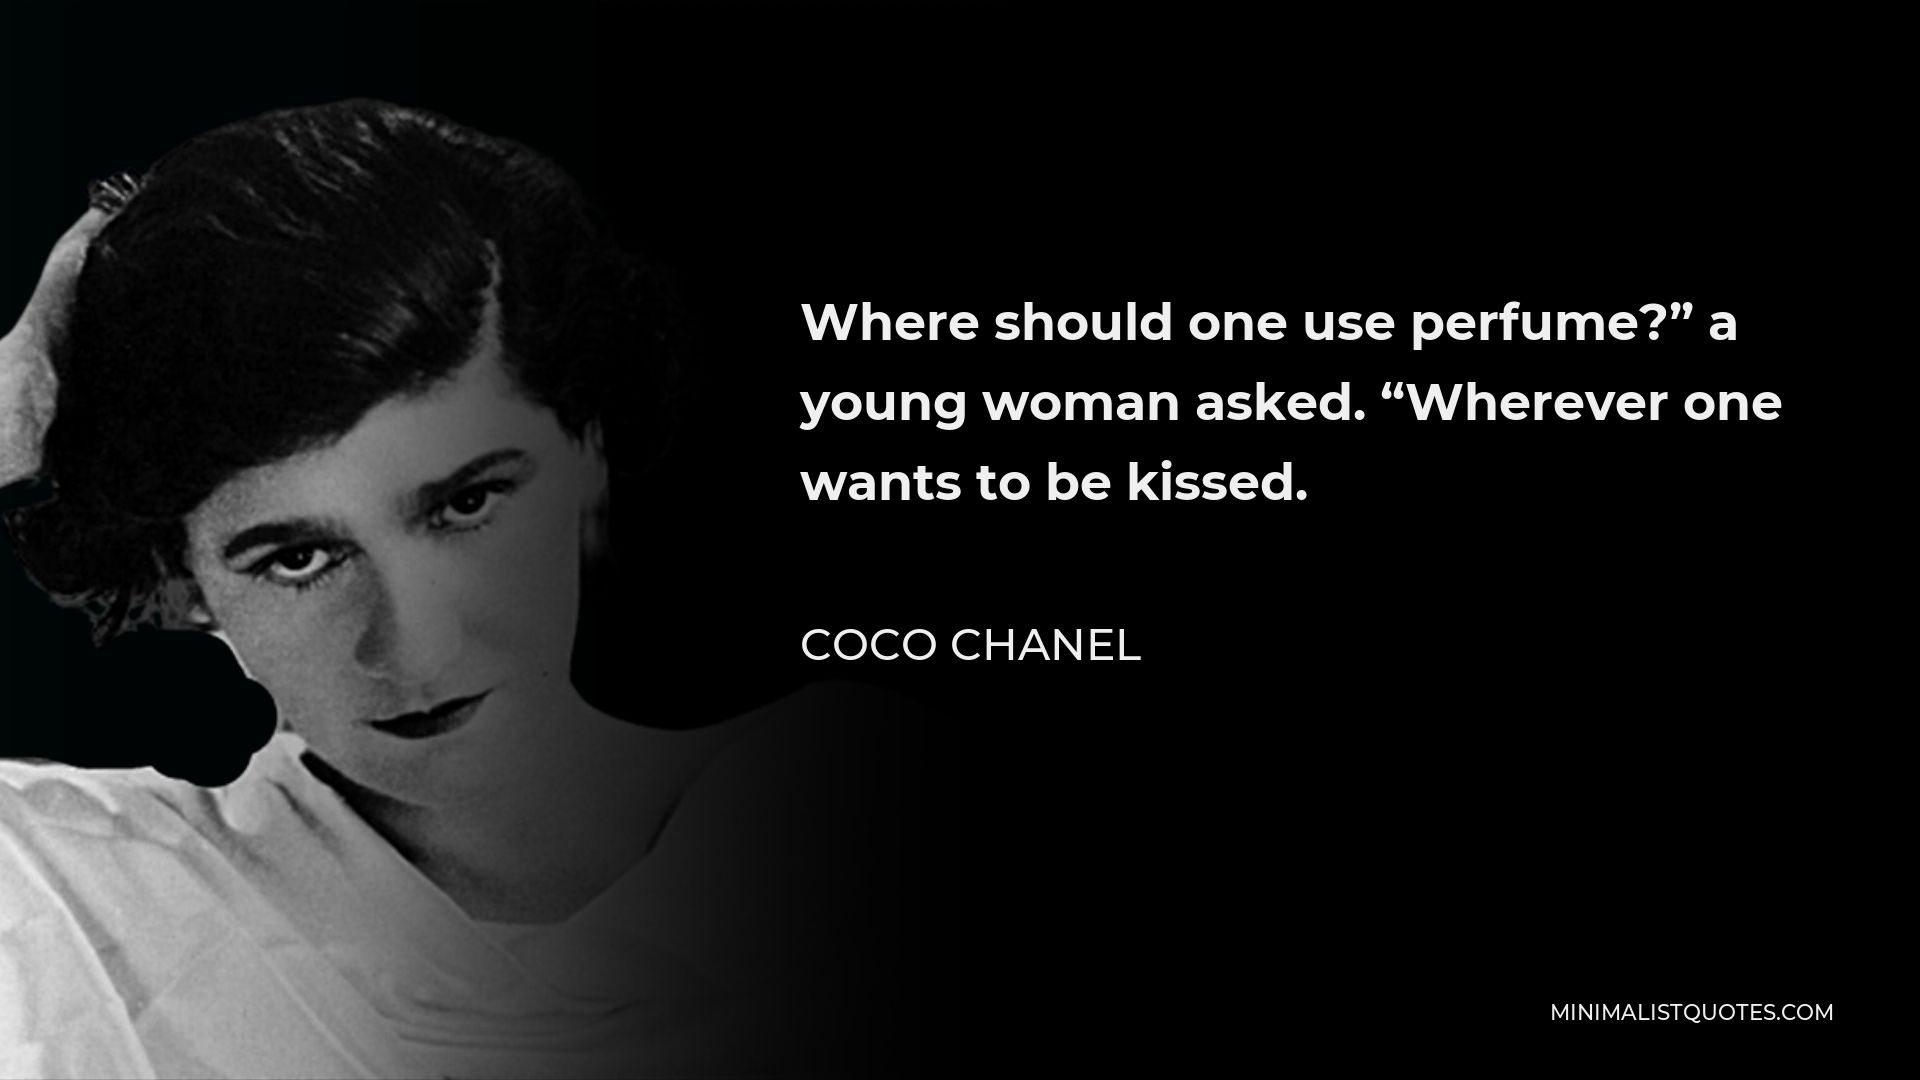 Coco Chanel Quote - Where should one use perfume?” a young woman asked. “Wherever one wants to be kissed.